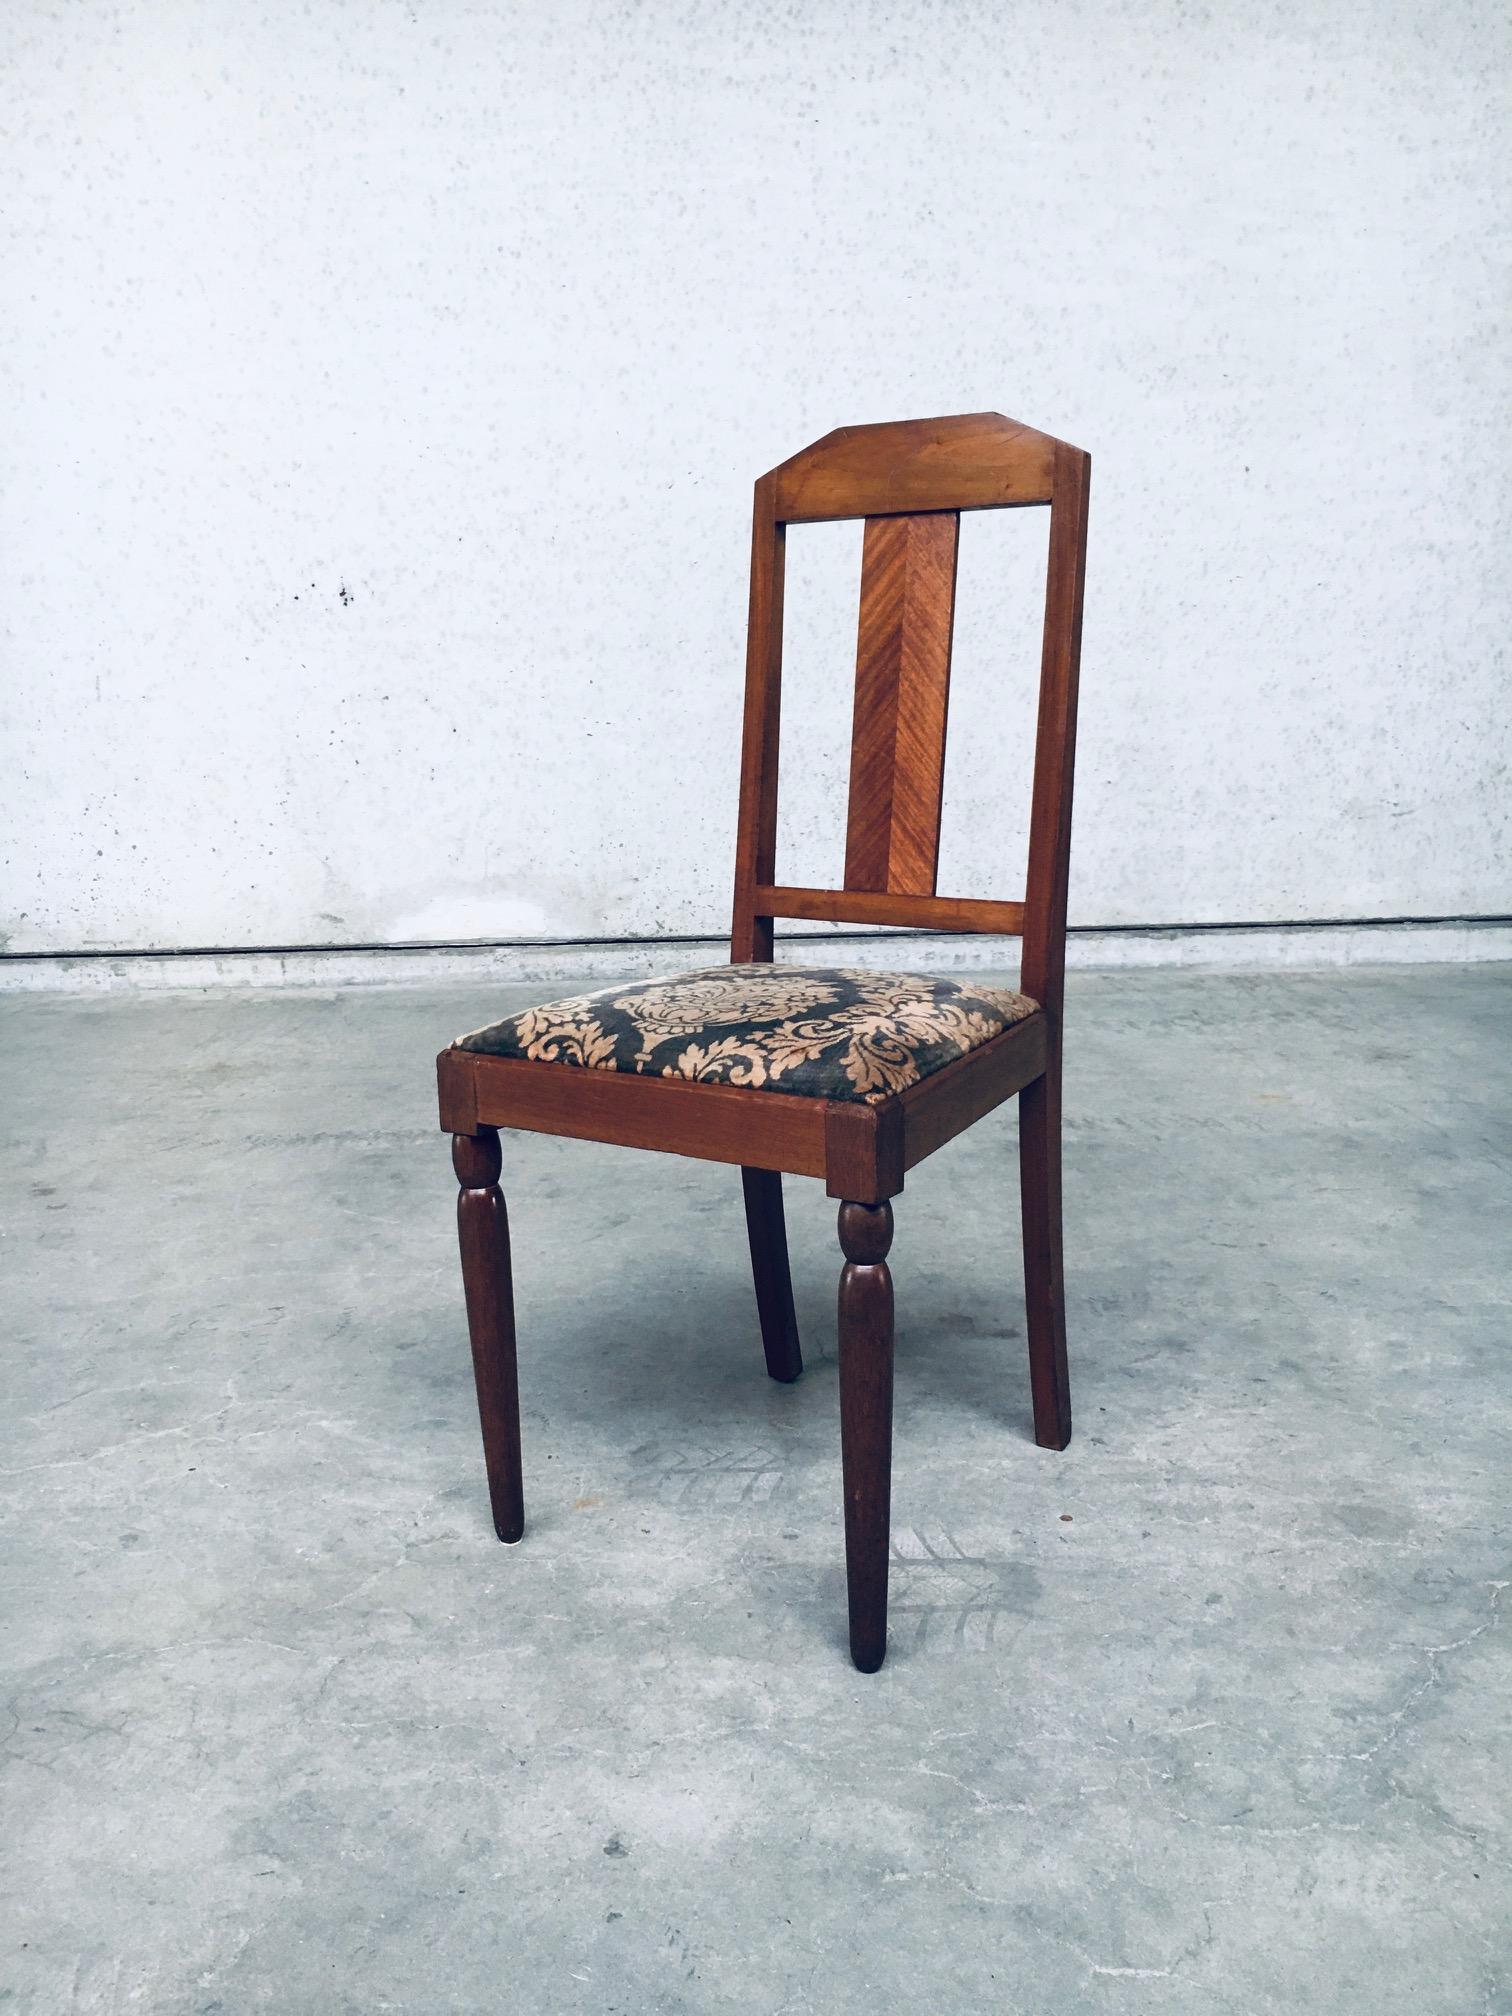 Vintage Dutch Modern Haagsche or Amsterdam School Design Dining Chair, made in the Netherlands 1930s. Art Deco period. Solid wood constructed chair with velvet printed fabric seat. This is all original and in very good condition. Nice details to the